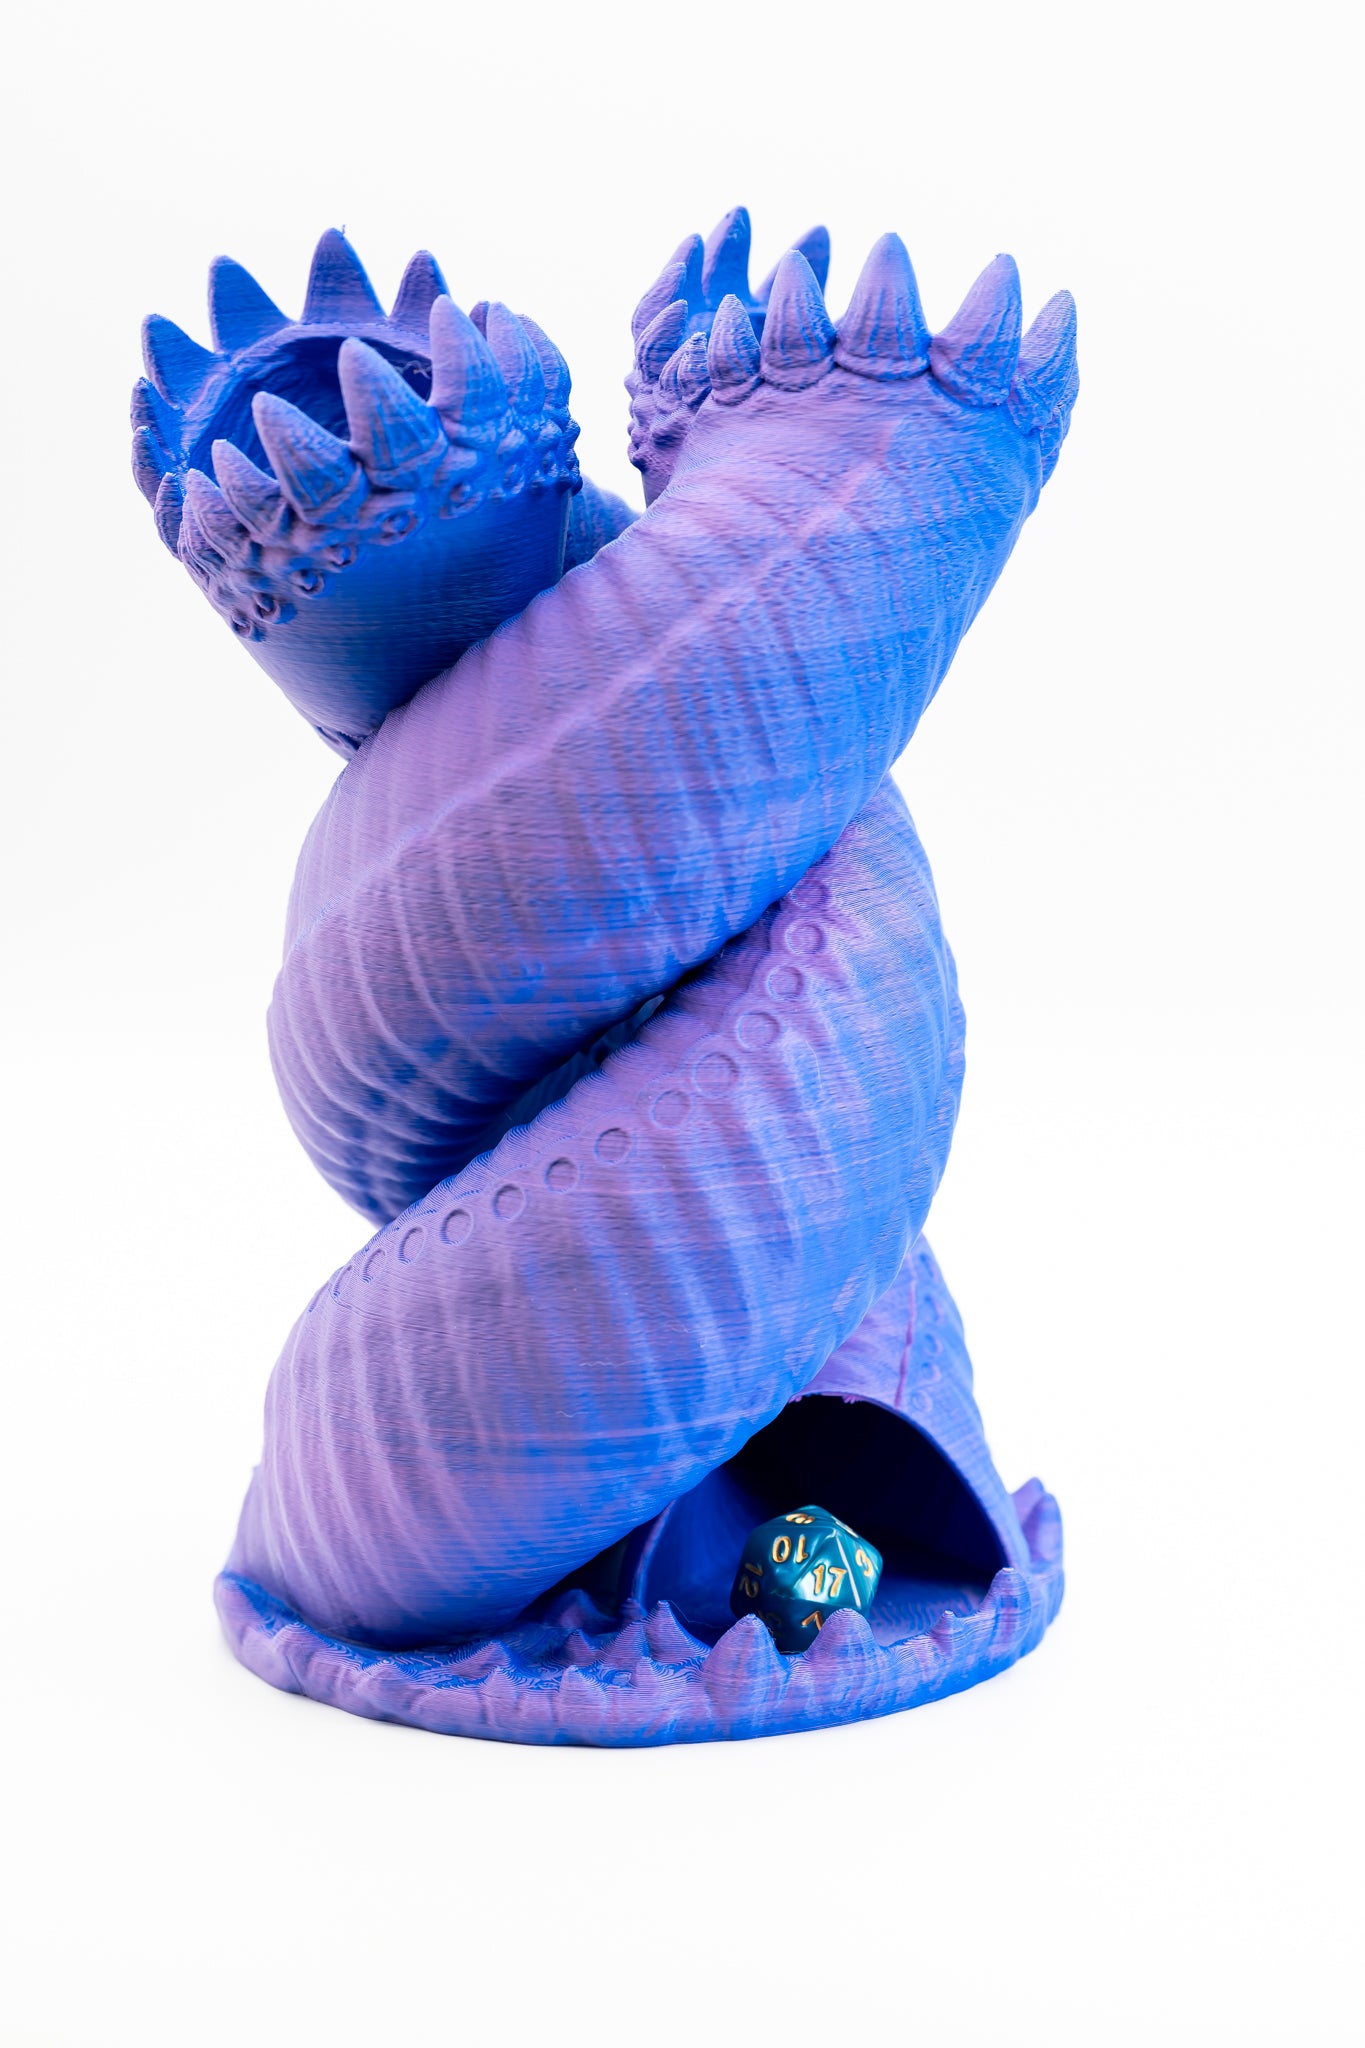 Twin Worm Monster - 3D Printed Dice Tower/Roller